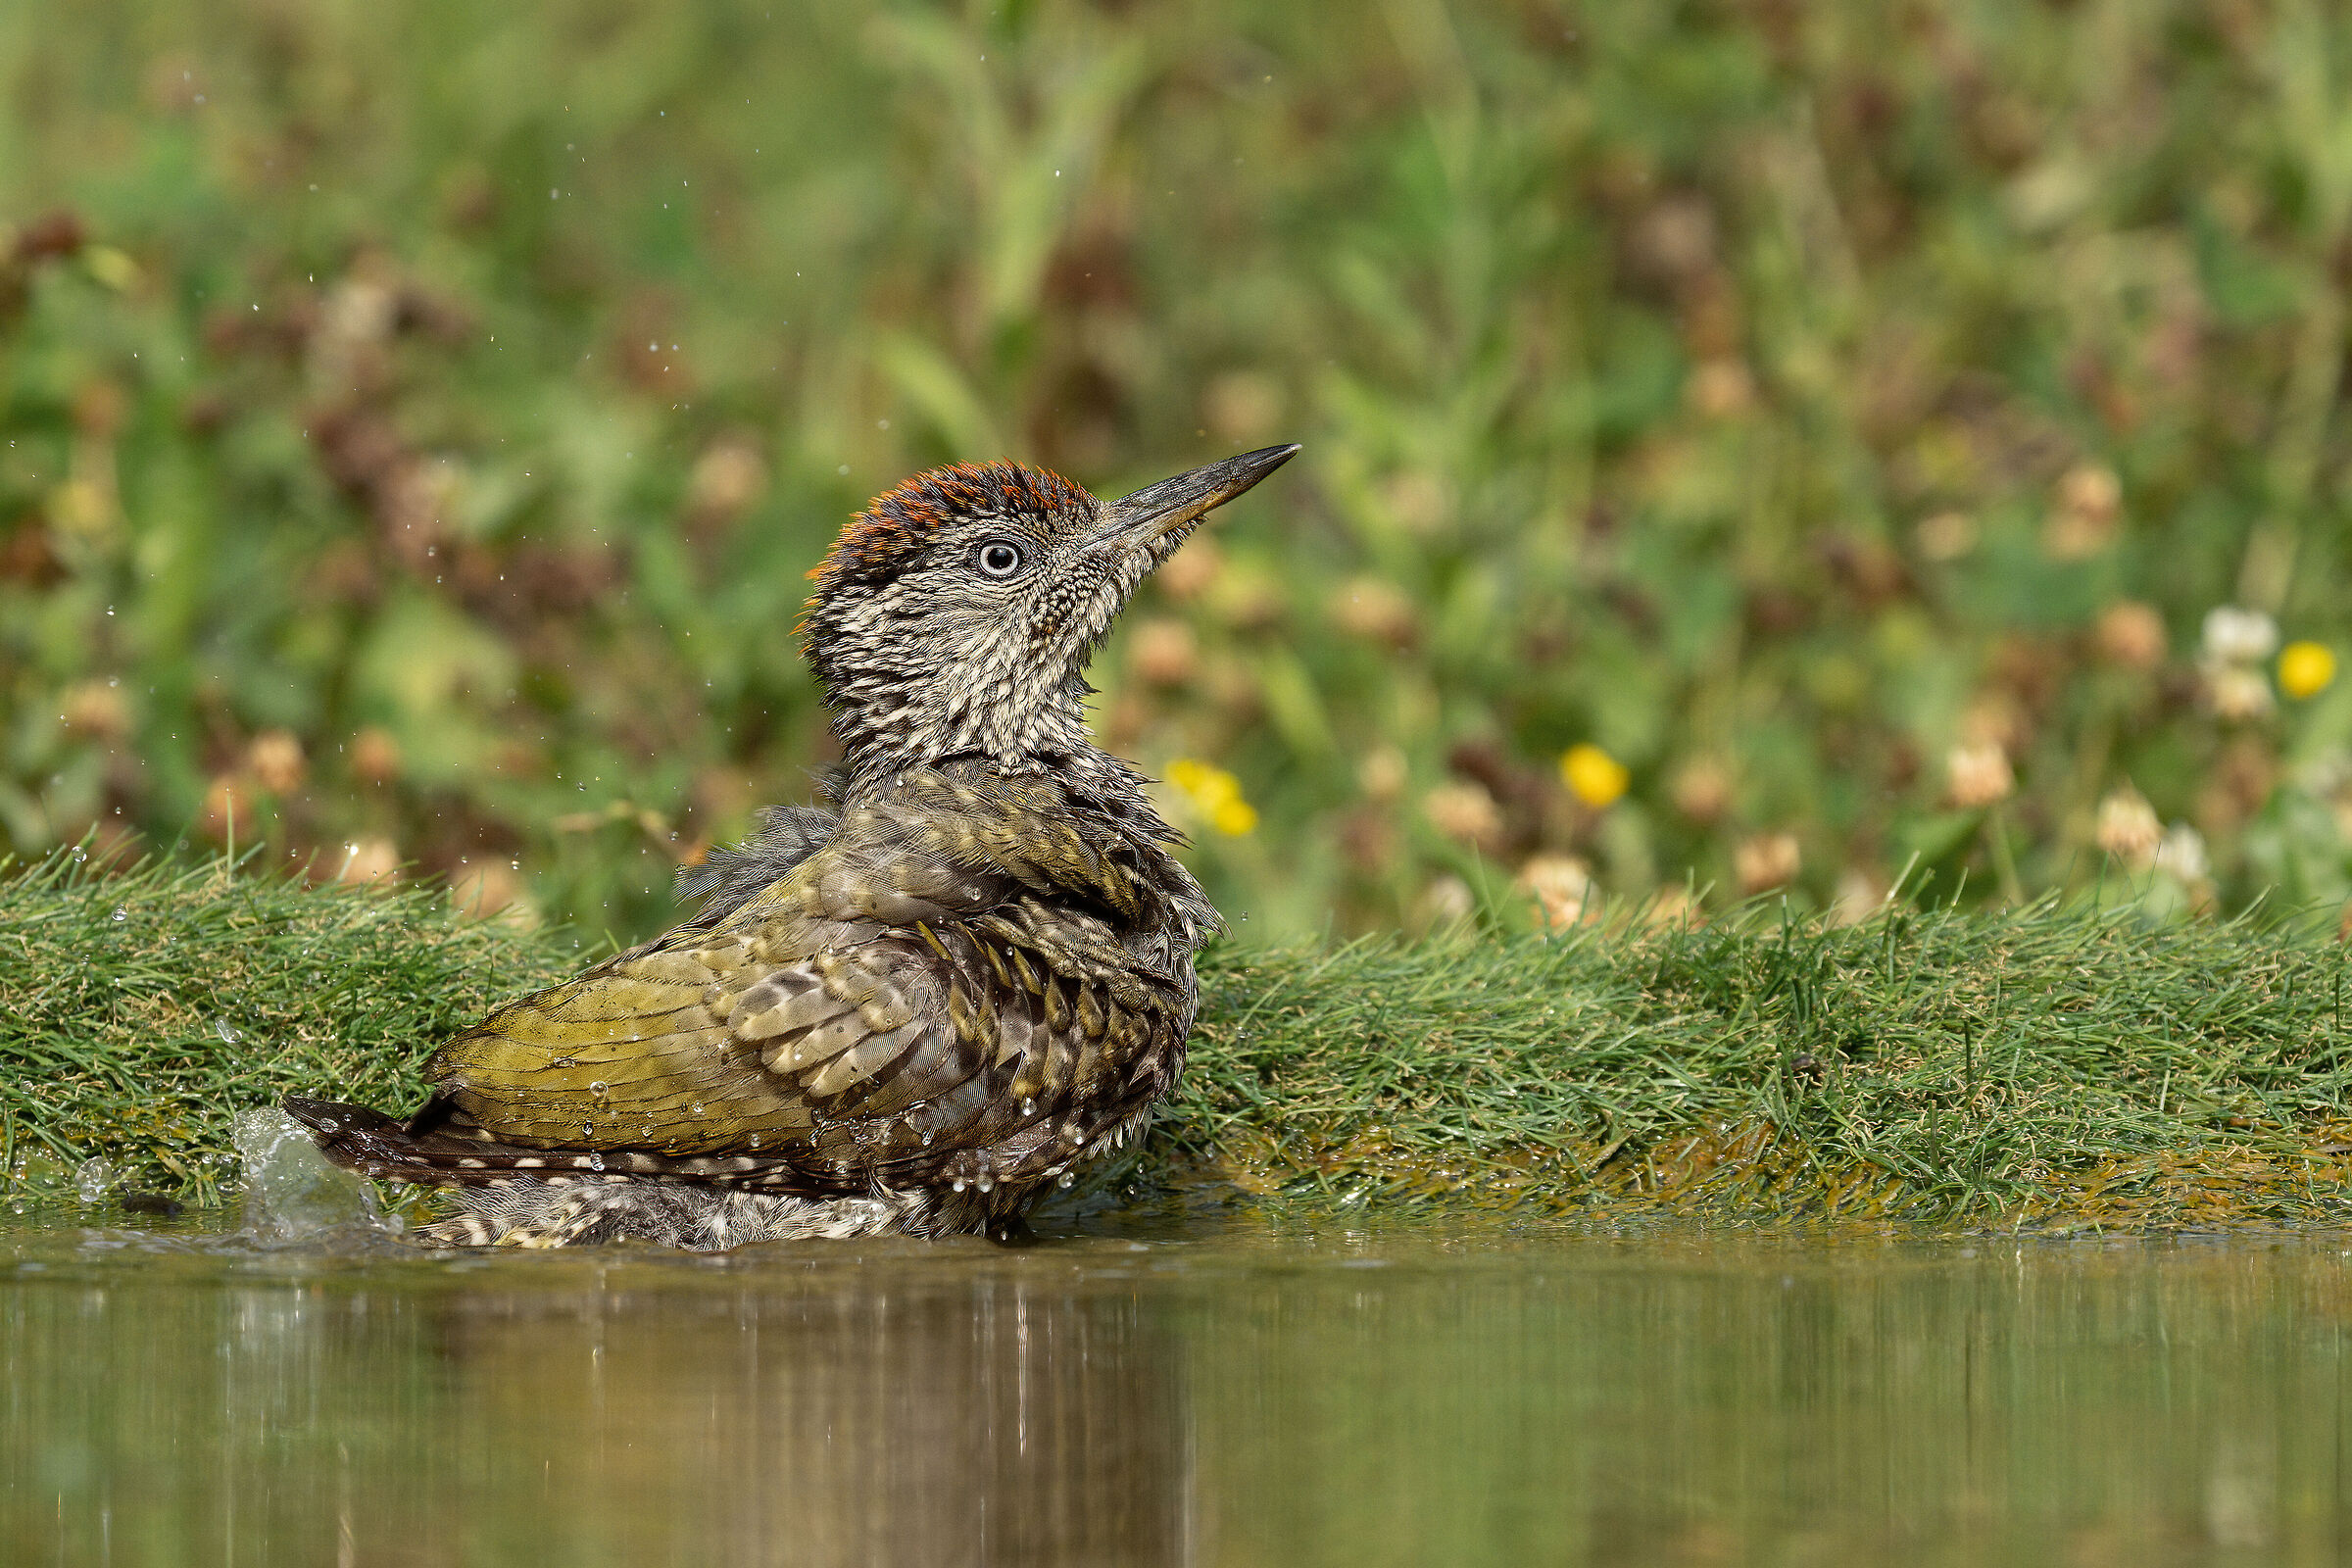 Young Green Woodpecker at the bath...